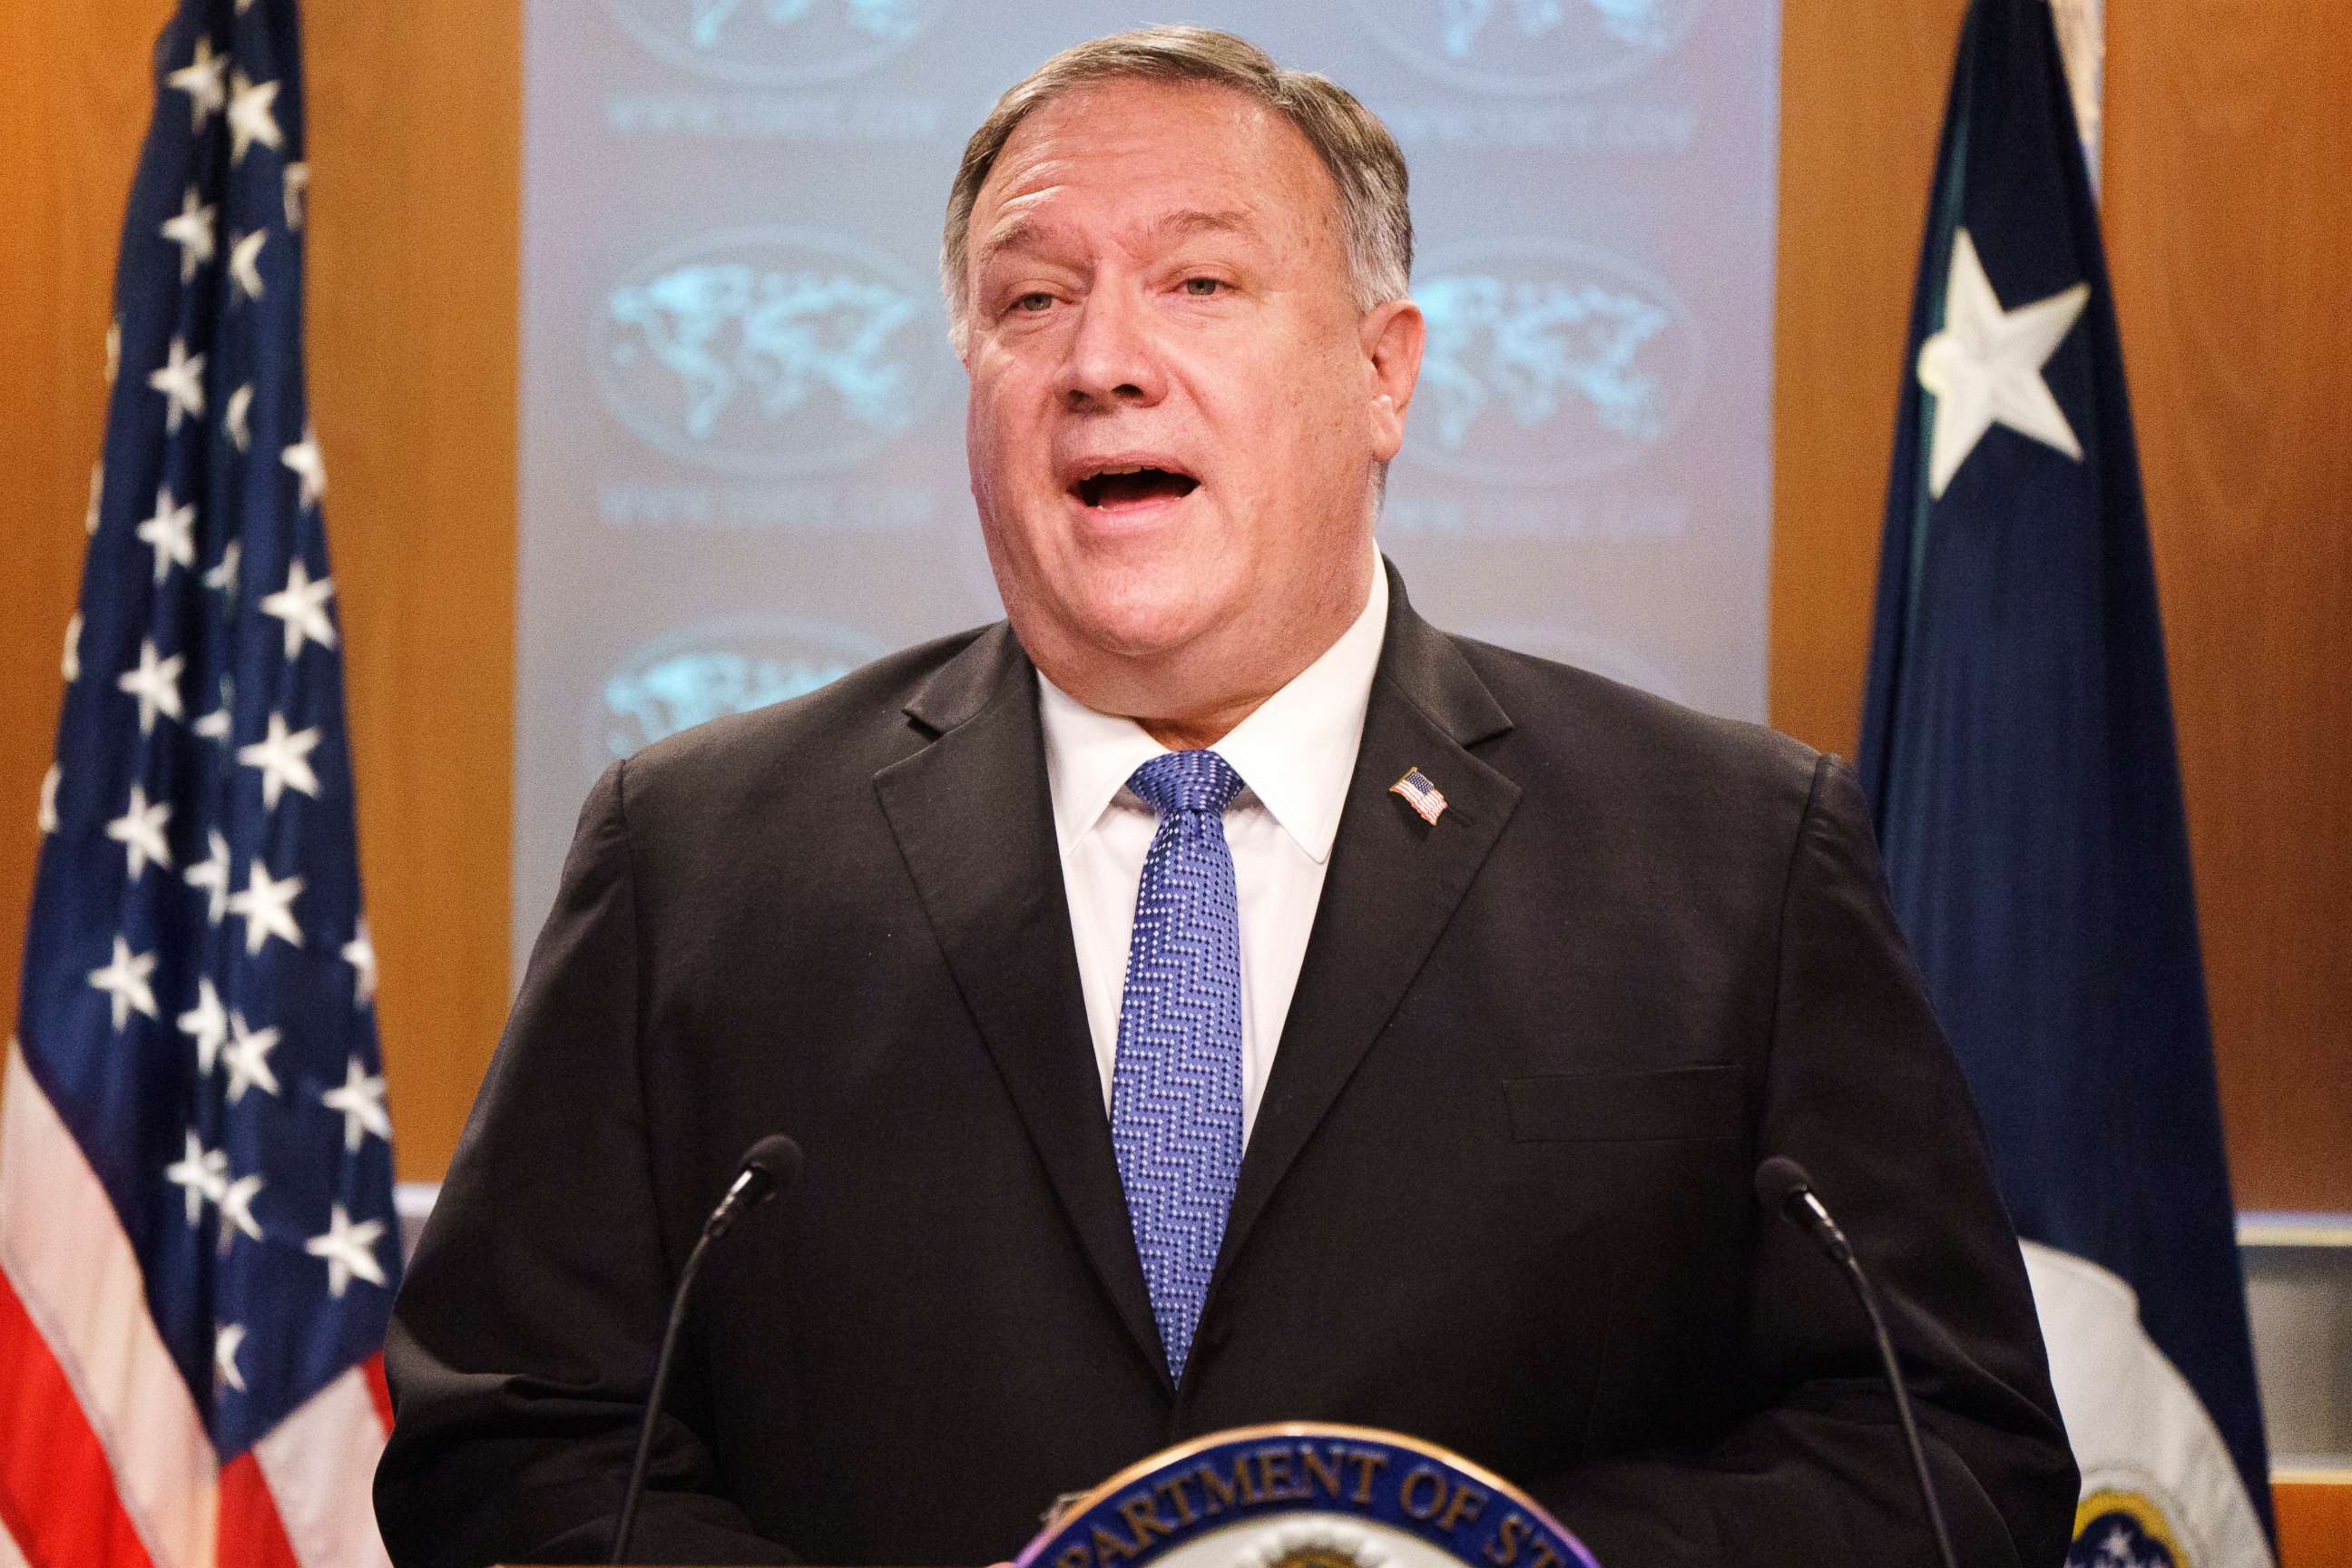 PHOTO: Secretary of State Mike Pompeo speaks during media briefing, Nov. 10, 2020, at the State Department in Washington.